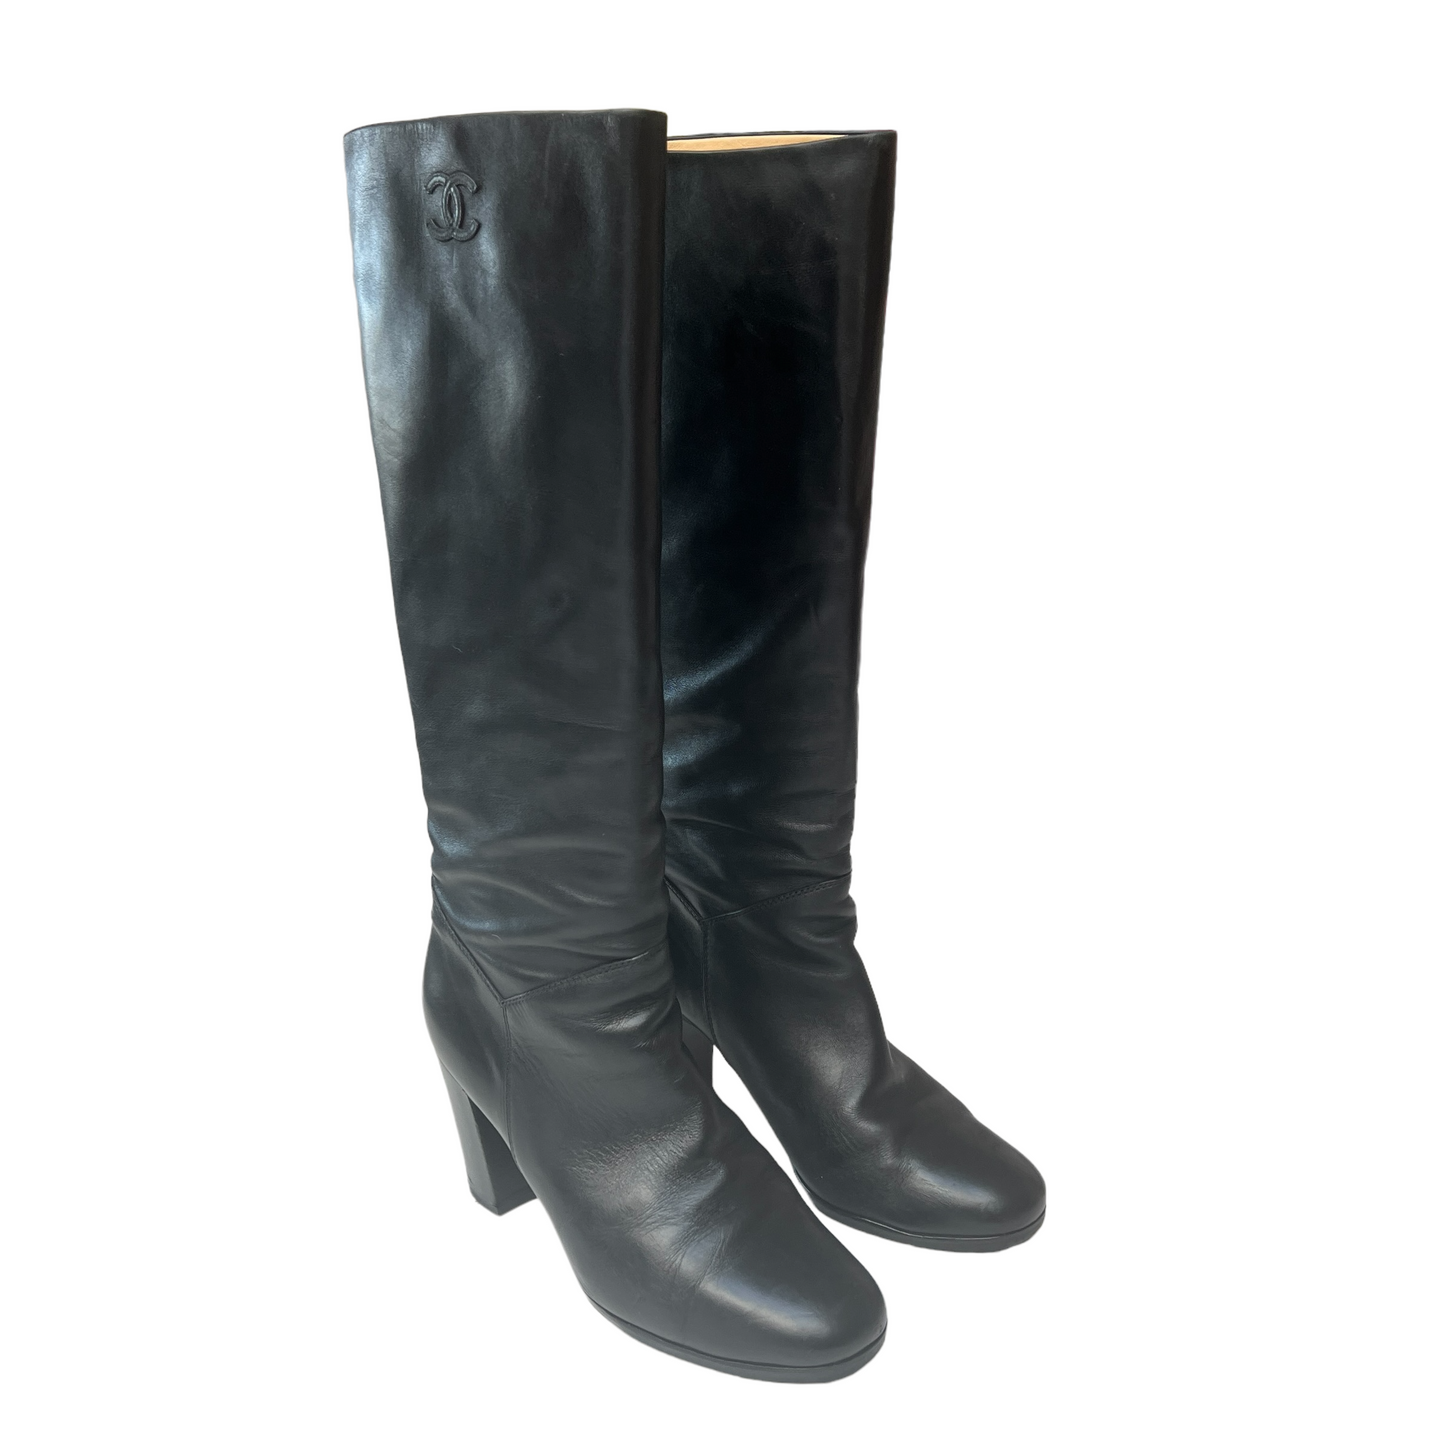 Black Leather Tall Boots - 10.5